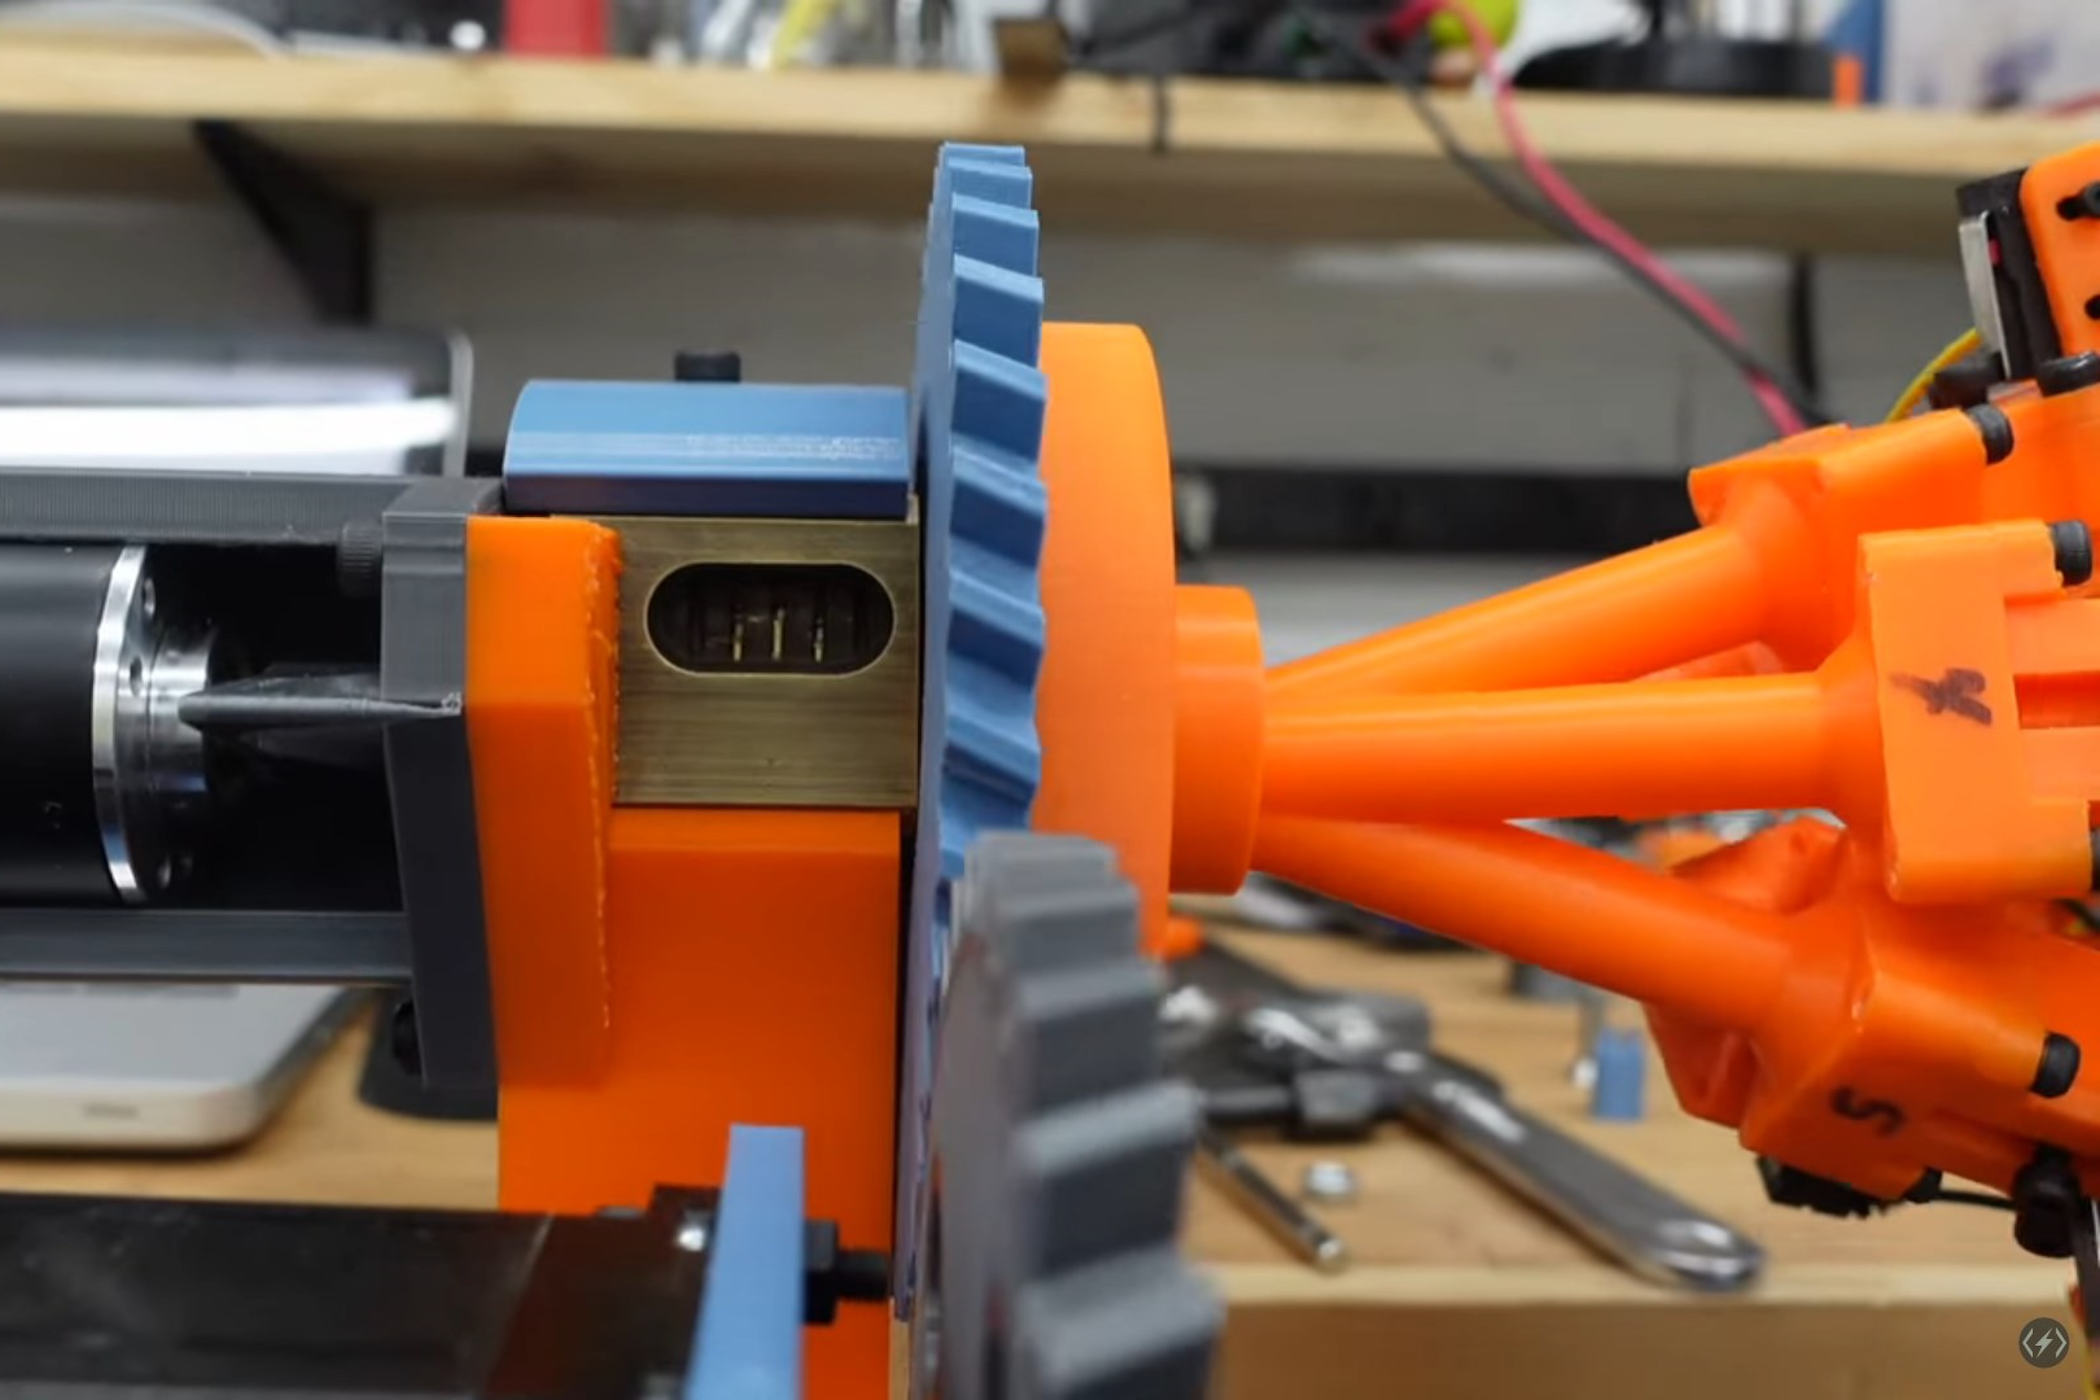 It takes this lockpicking robot six days to open a lock, but we love it anyway